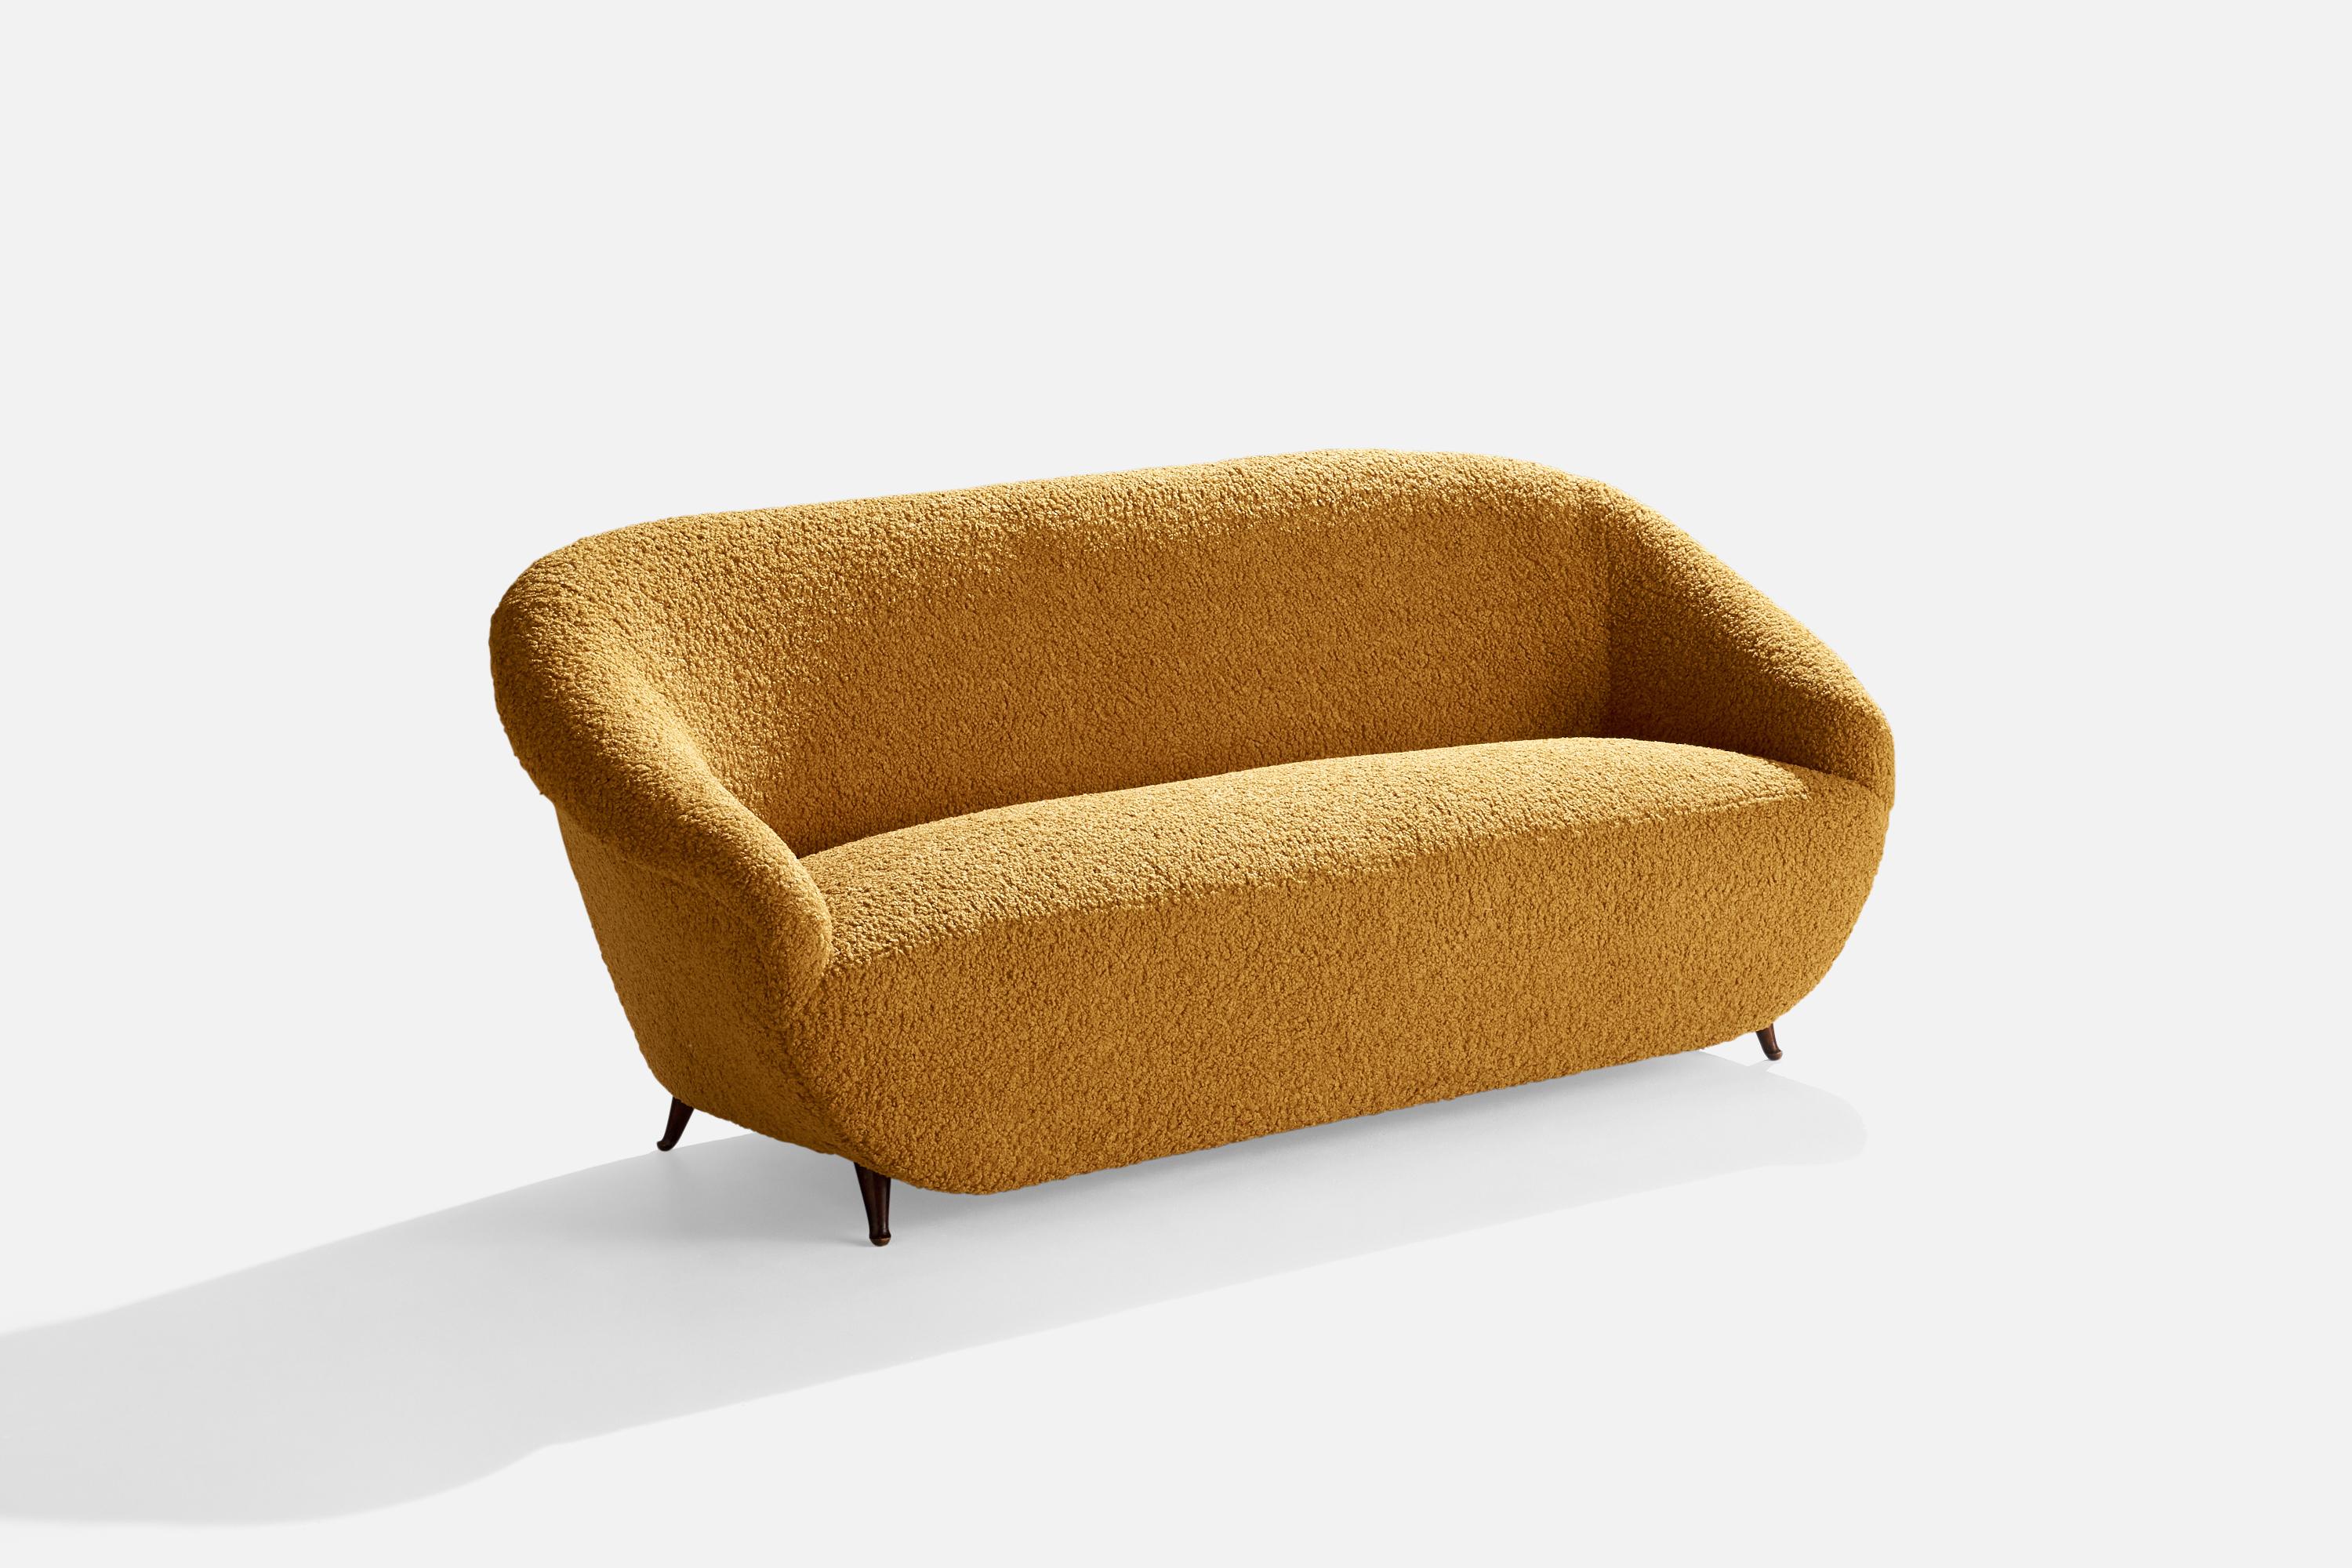 A yellow beige bouclé fabric and wood sofa designed and produced in Italy, c. 1950s.

Seat height 16.5”.